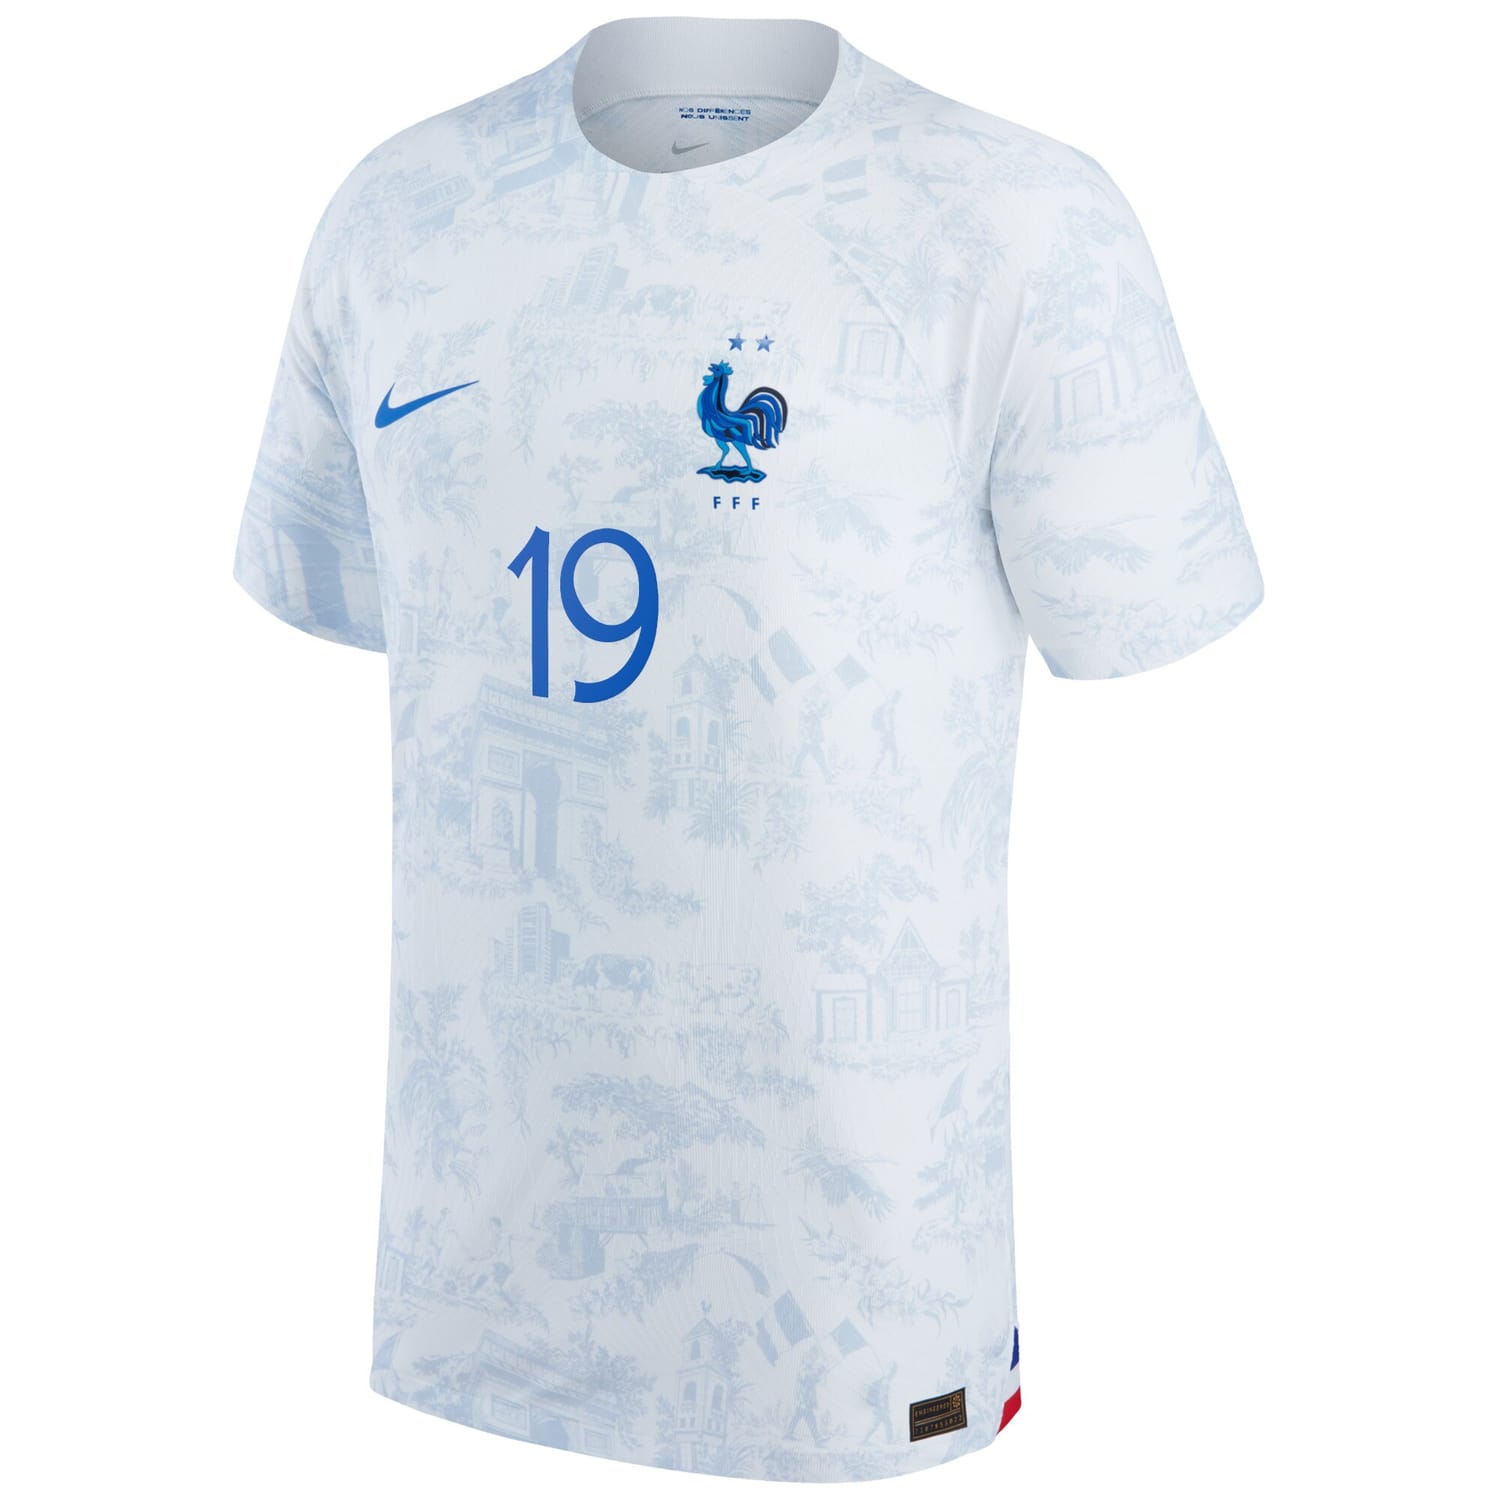 France National Team Away Authentic Jersey Shirt 2022 player Karim Benzema 19 printing for Men